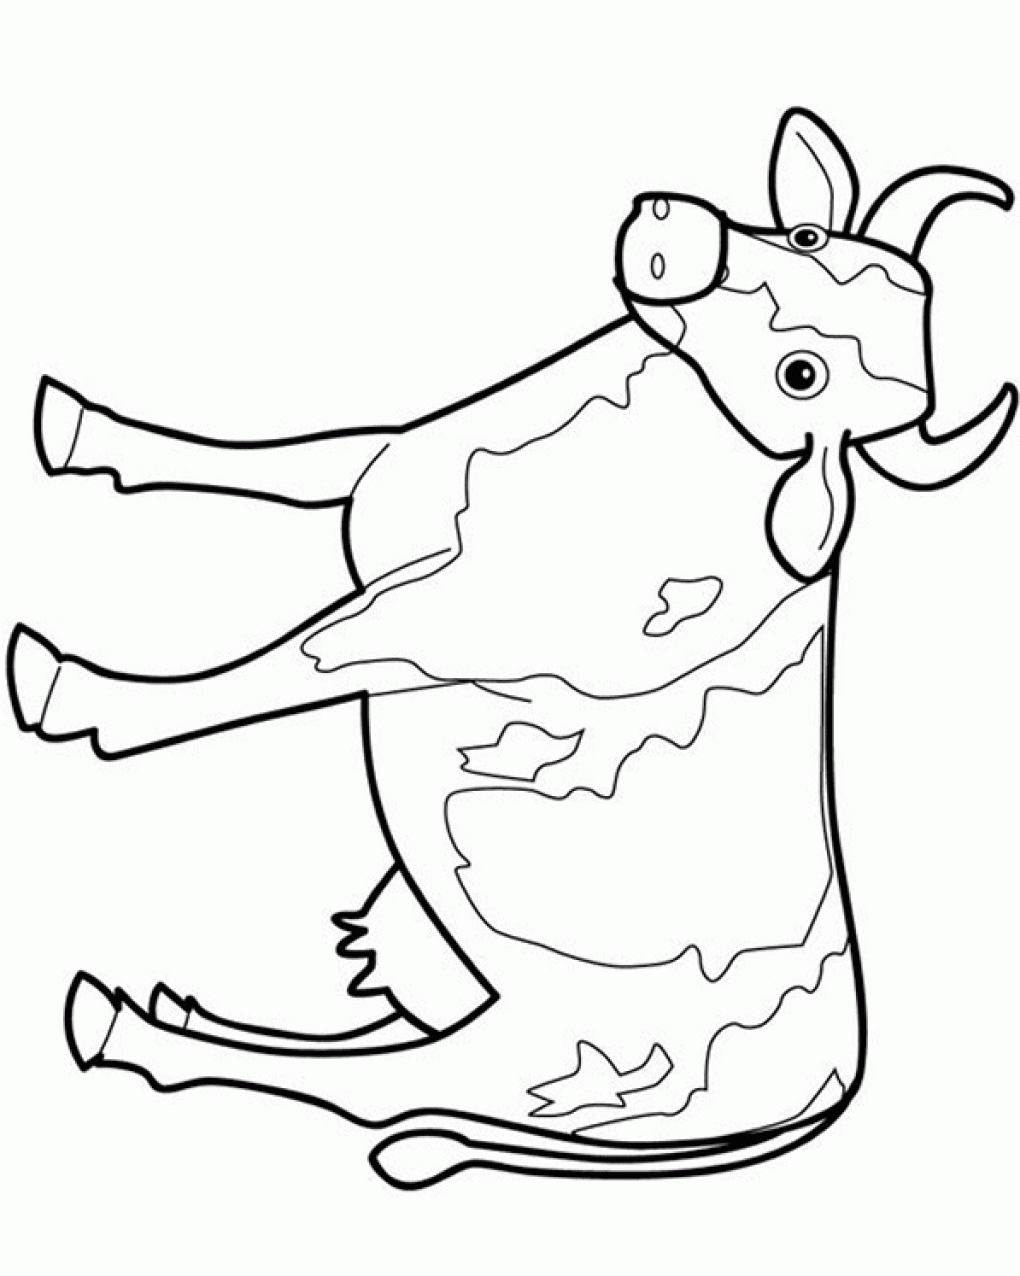 Cow coloring pages for kids - Coloring Pages & Pictures - IMAGIXS